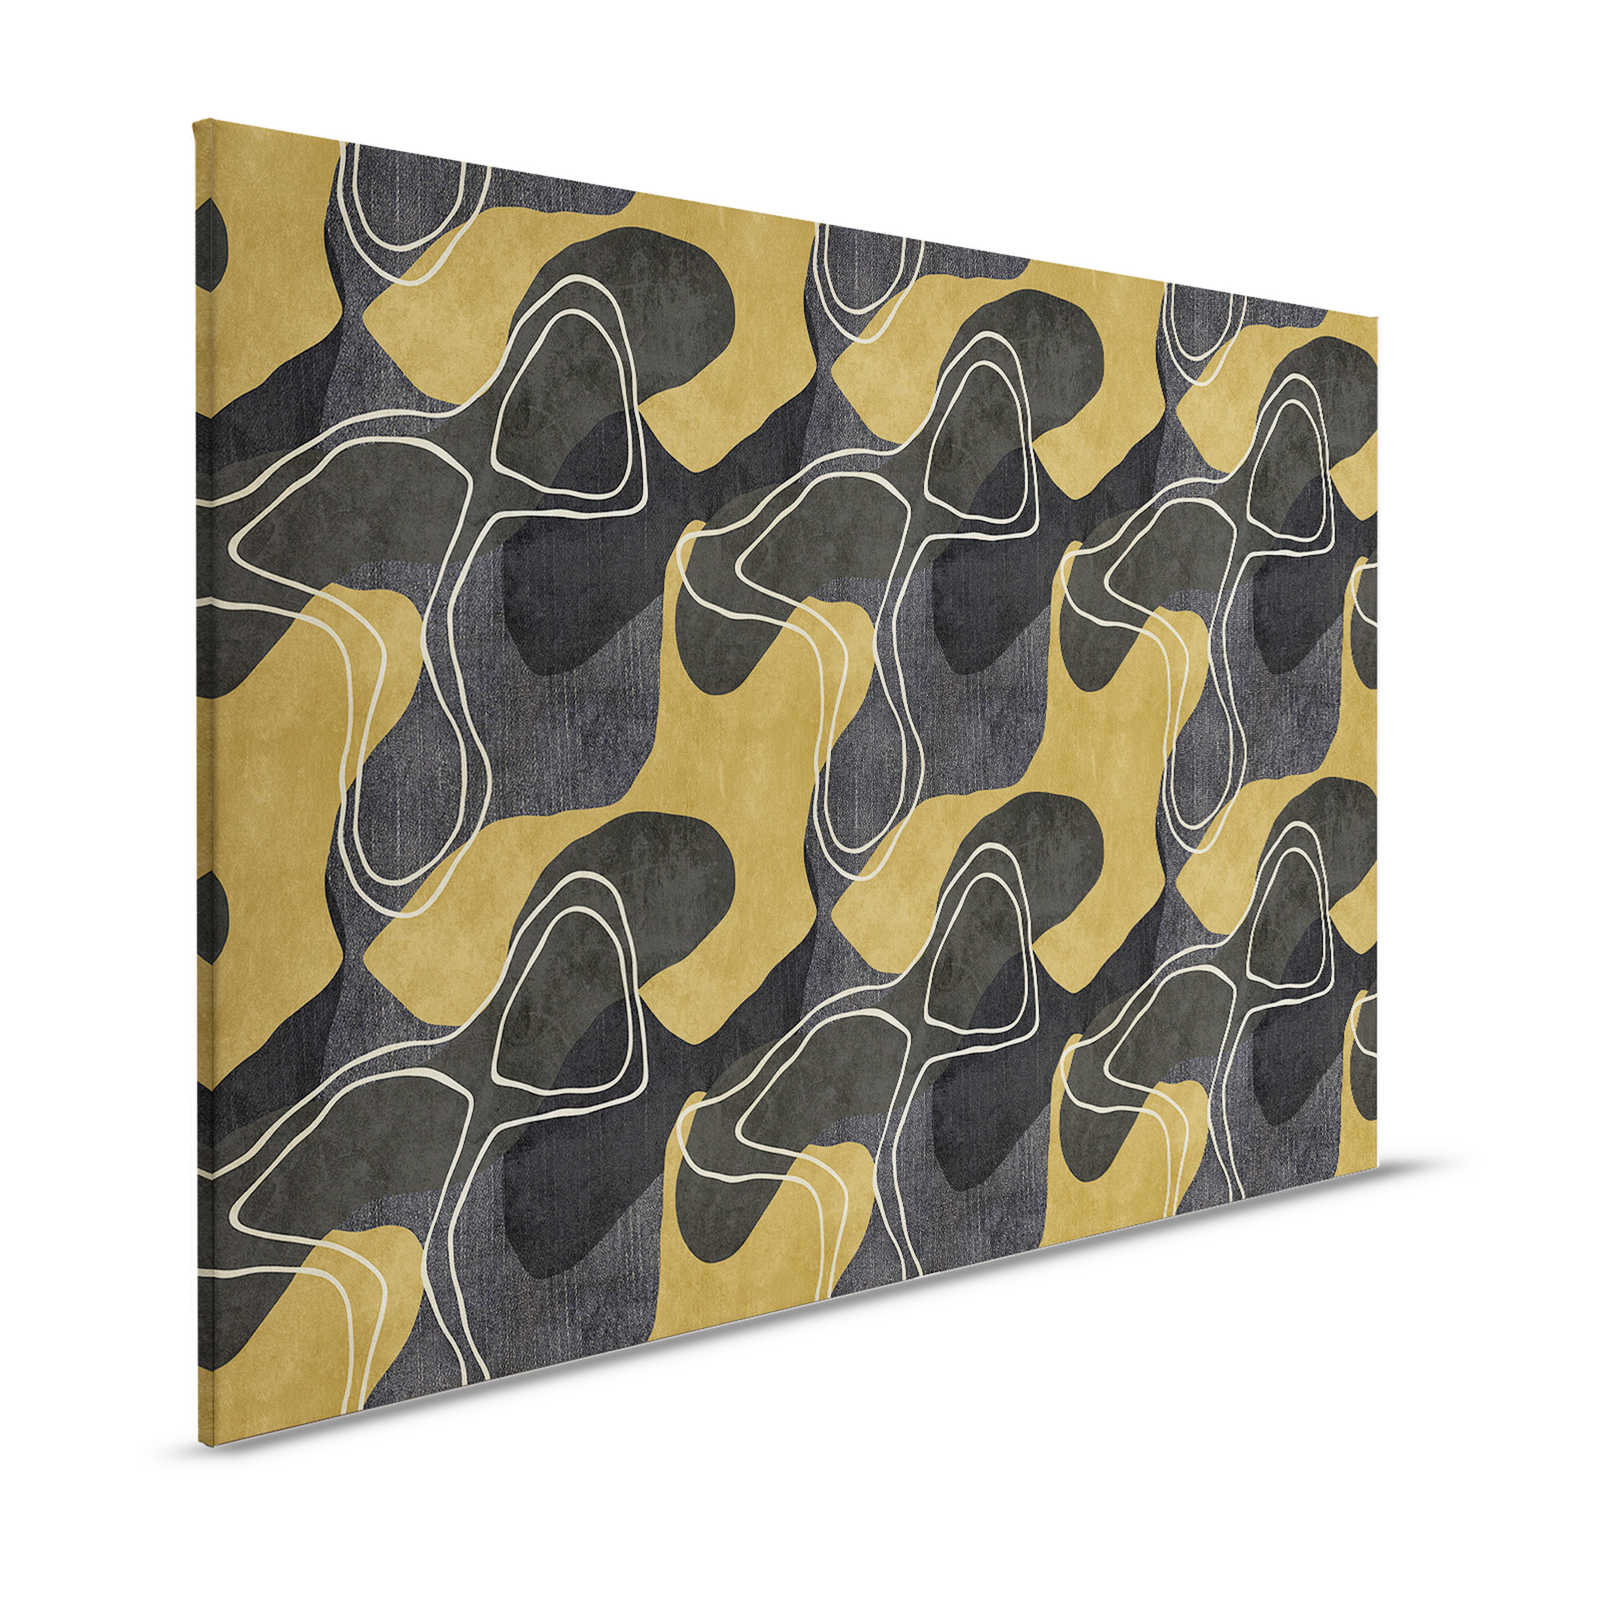 Terra 2 - Abstract Canvas painting Ethno Pattern in Nature Colours - 1,20 m x 0,80 m
